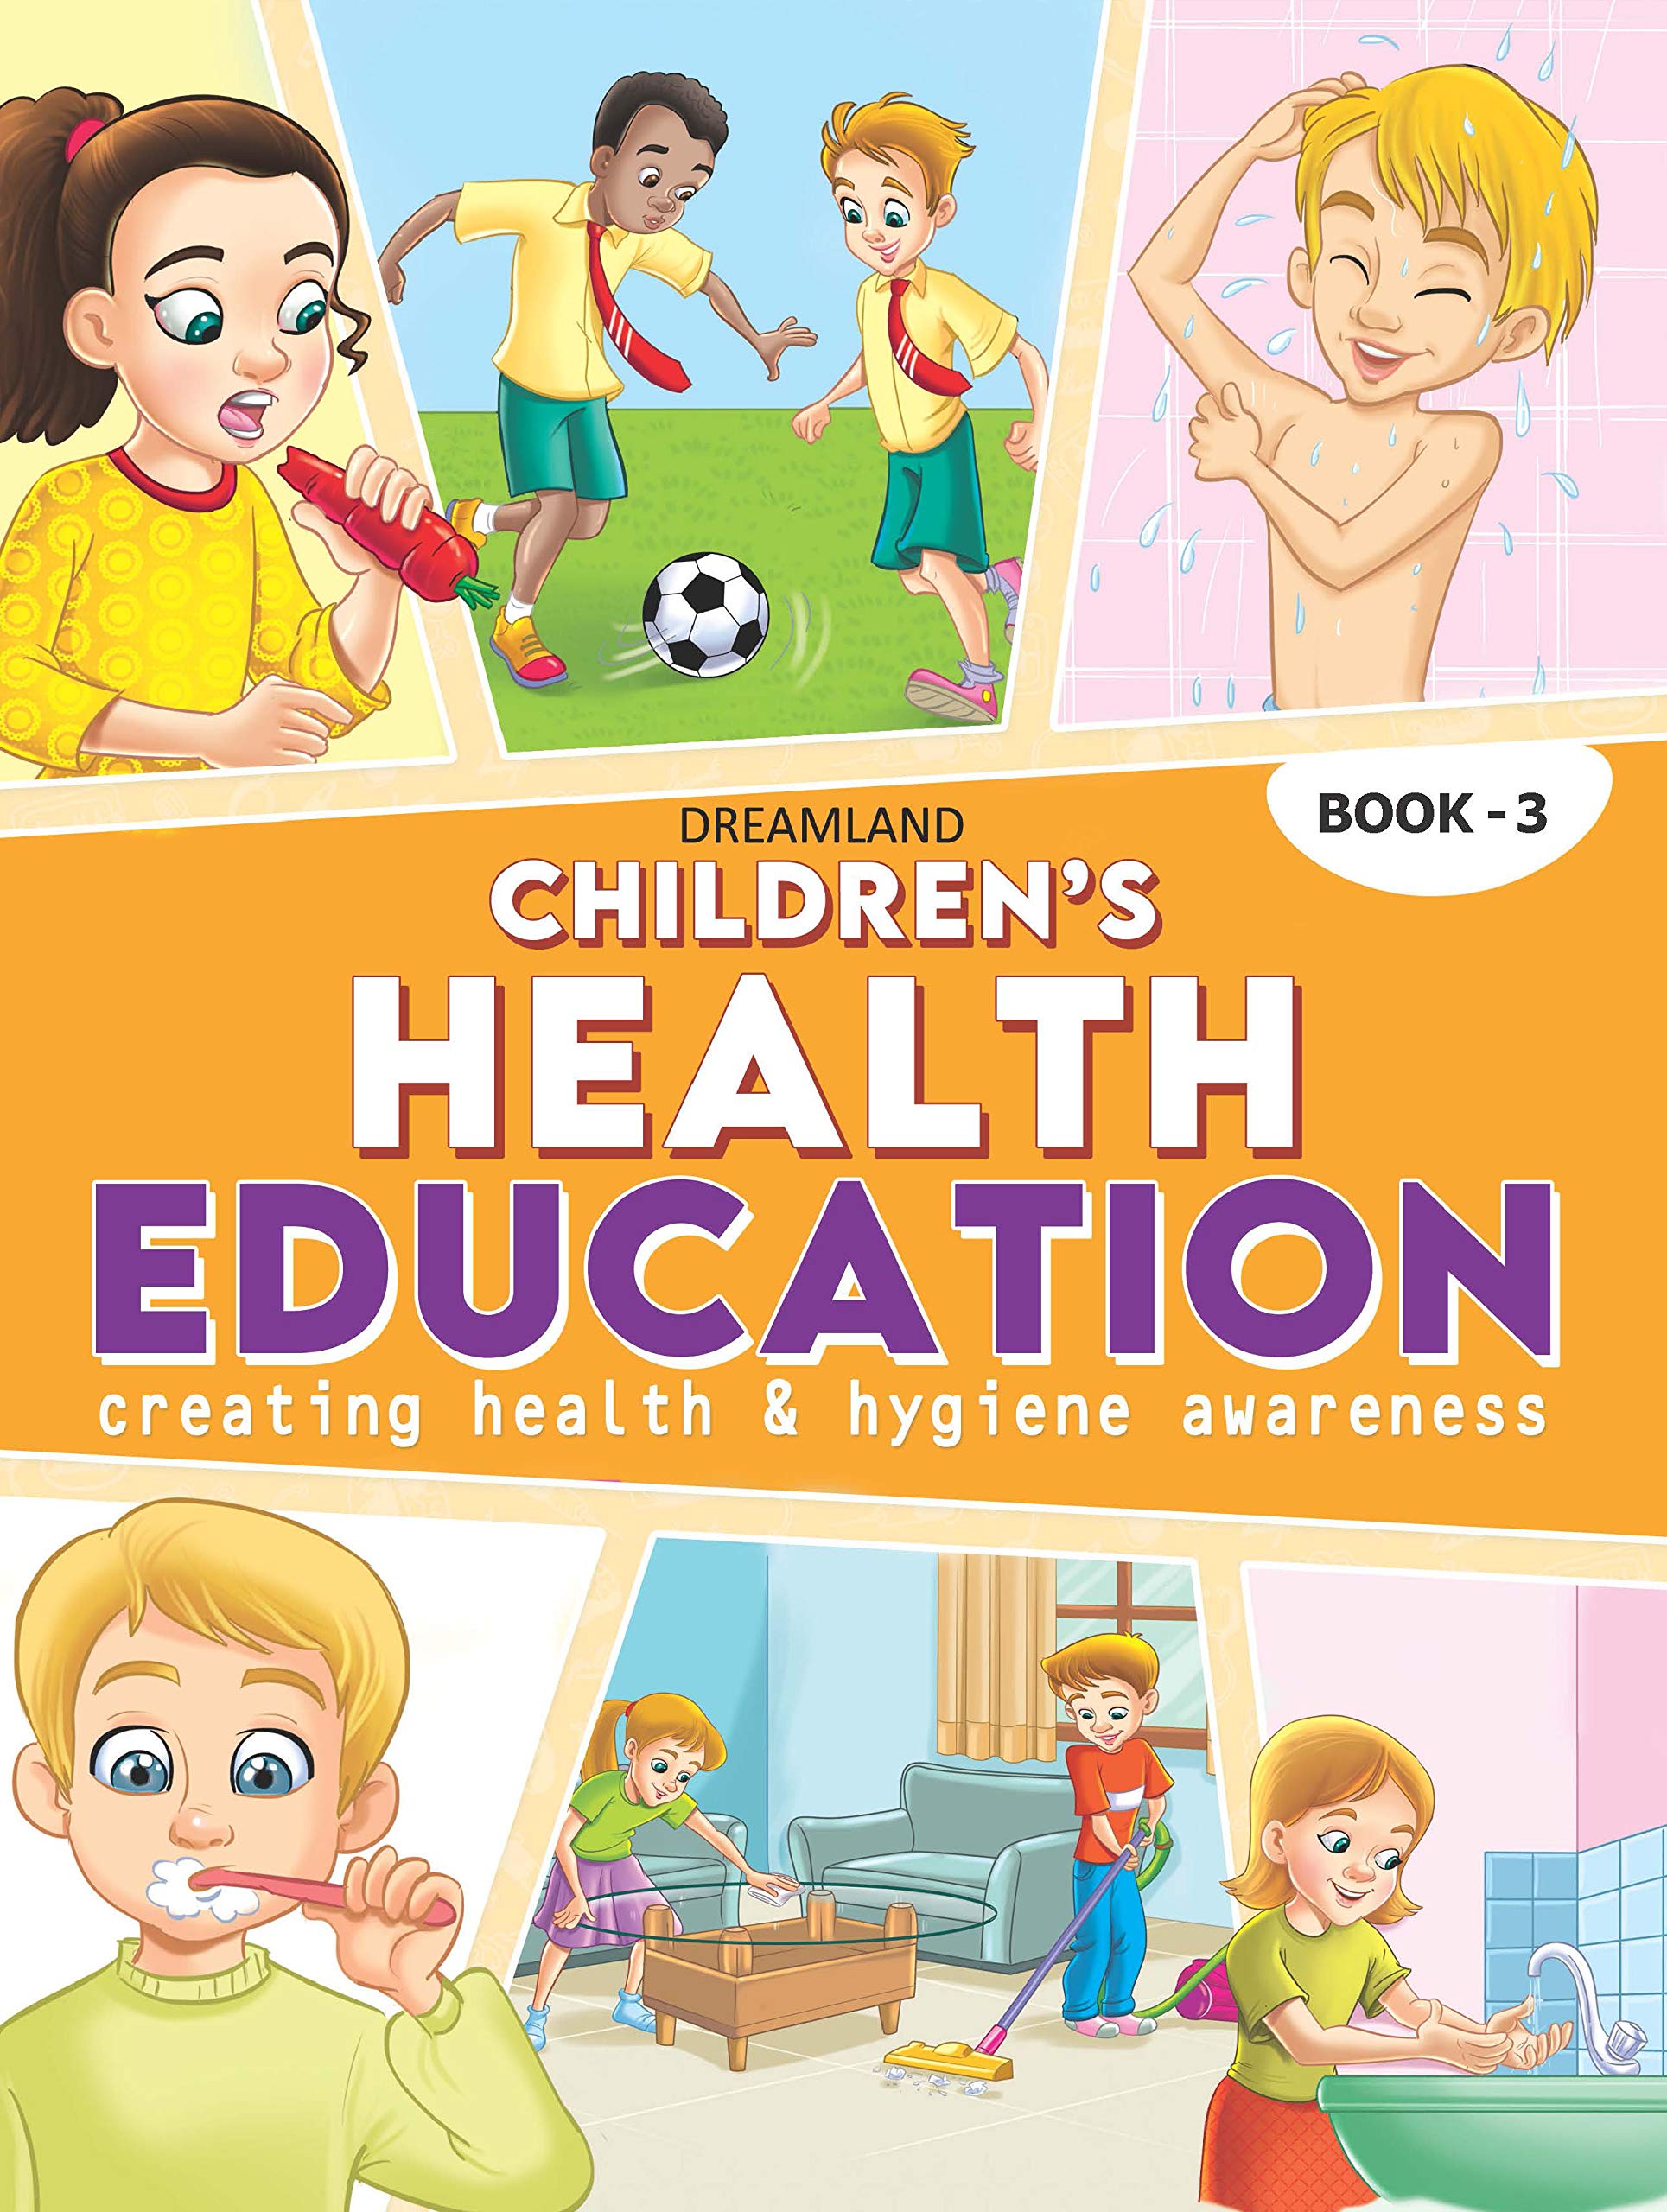 Booksellers　Dreamland　Malik　Children's　Book　Education　Health　Stationers